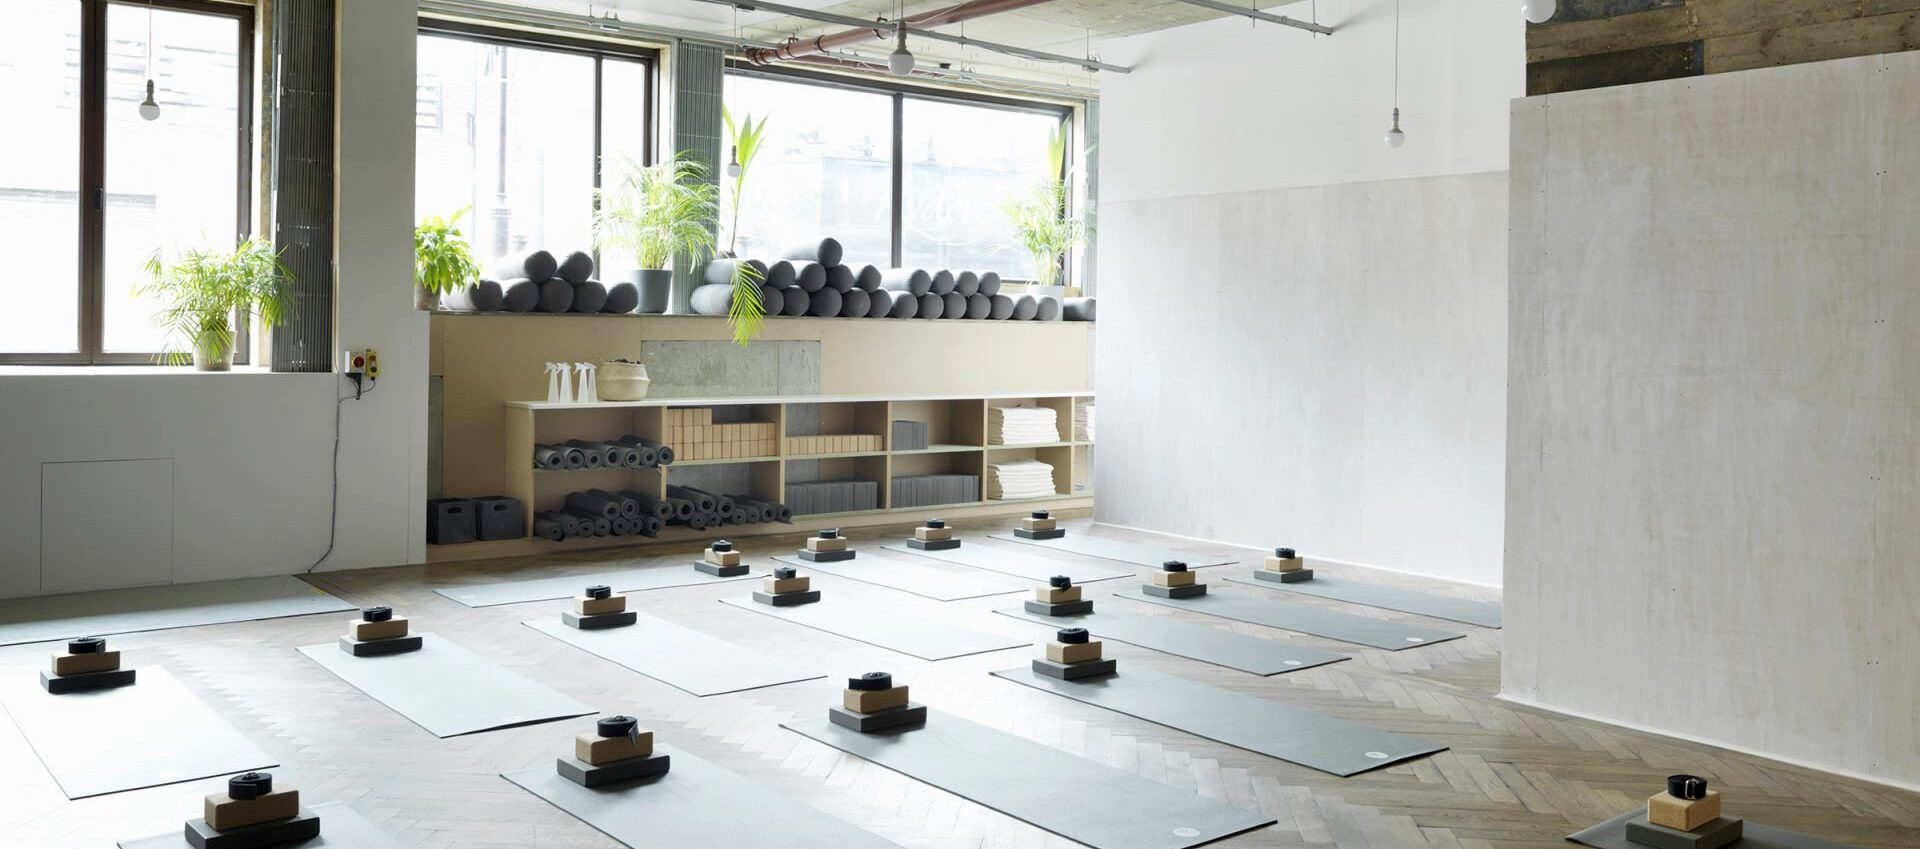 The Breathing Space Club - PLEASE. Close the front Yoga Studio